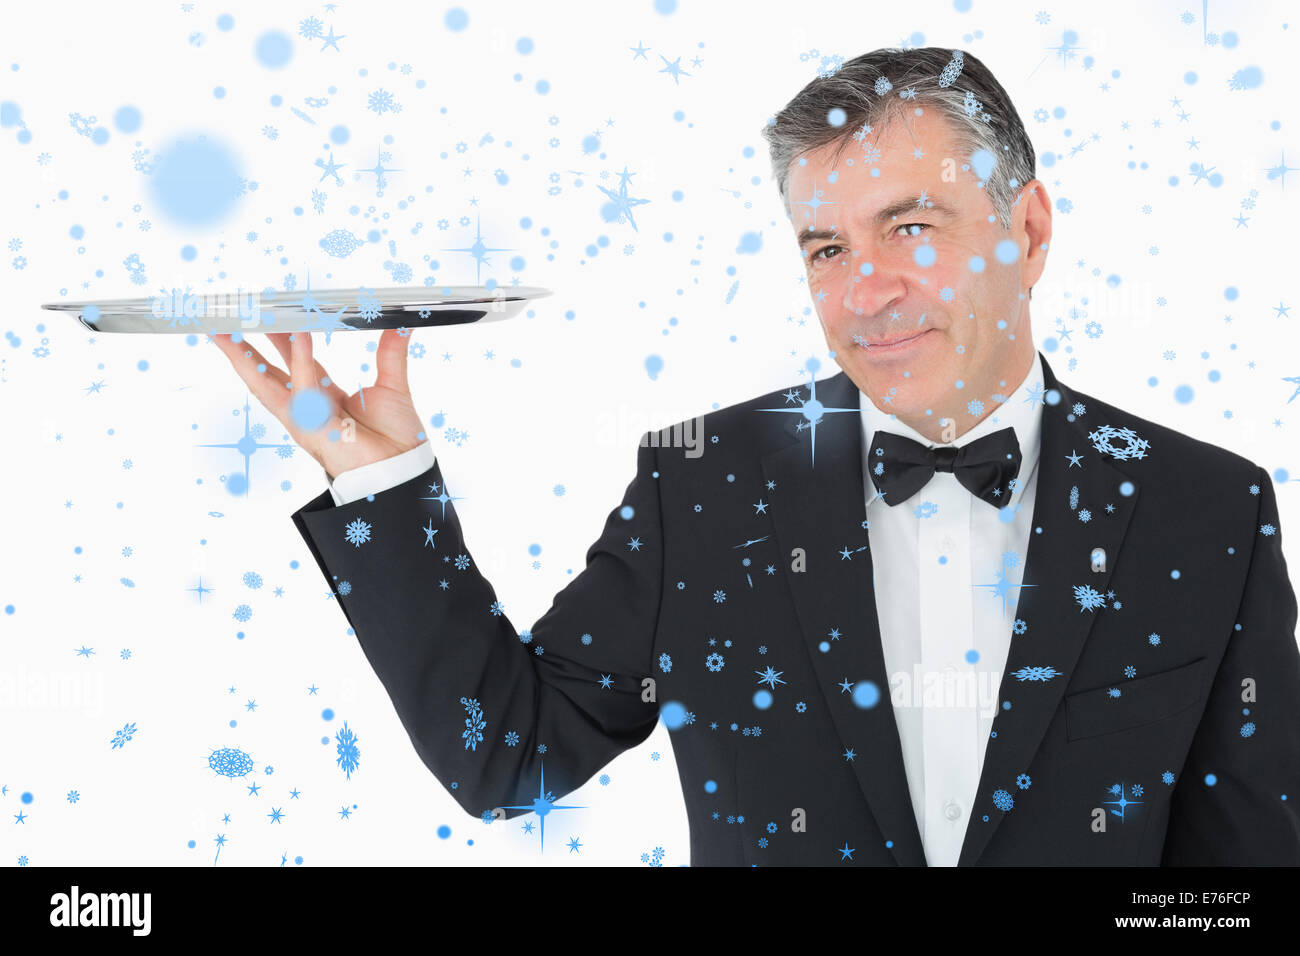 Composite image of welldressed waiter holding a silver tray Stock Photo